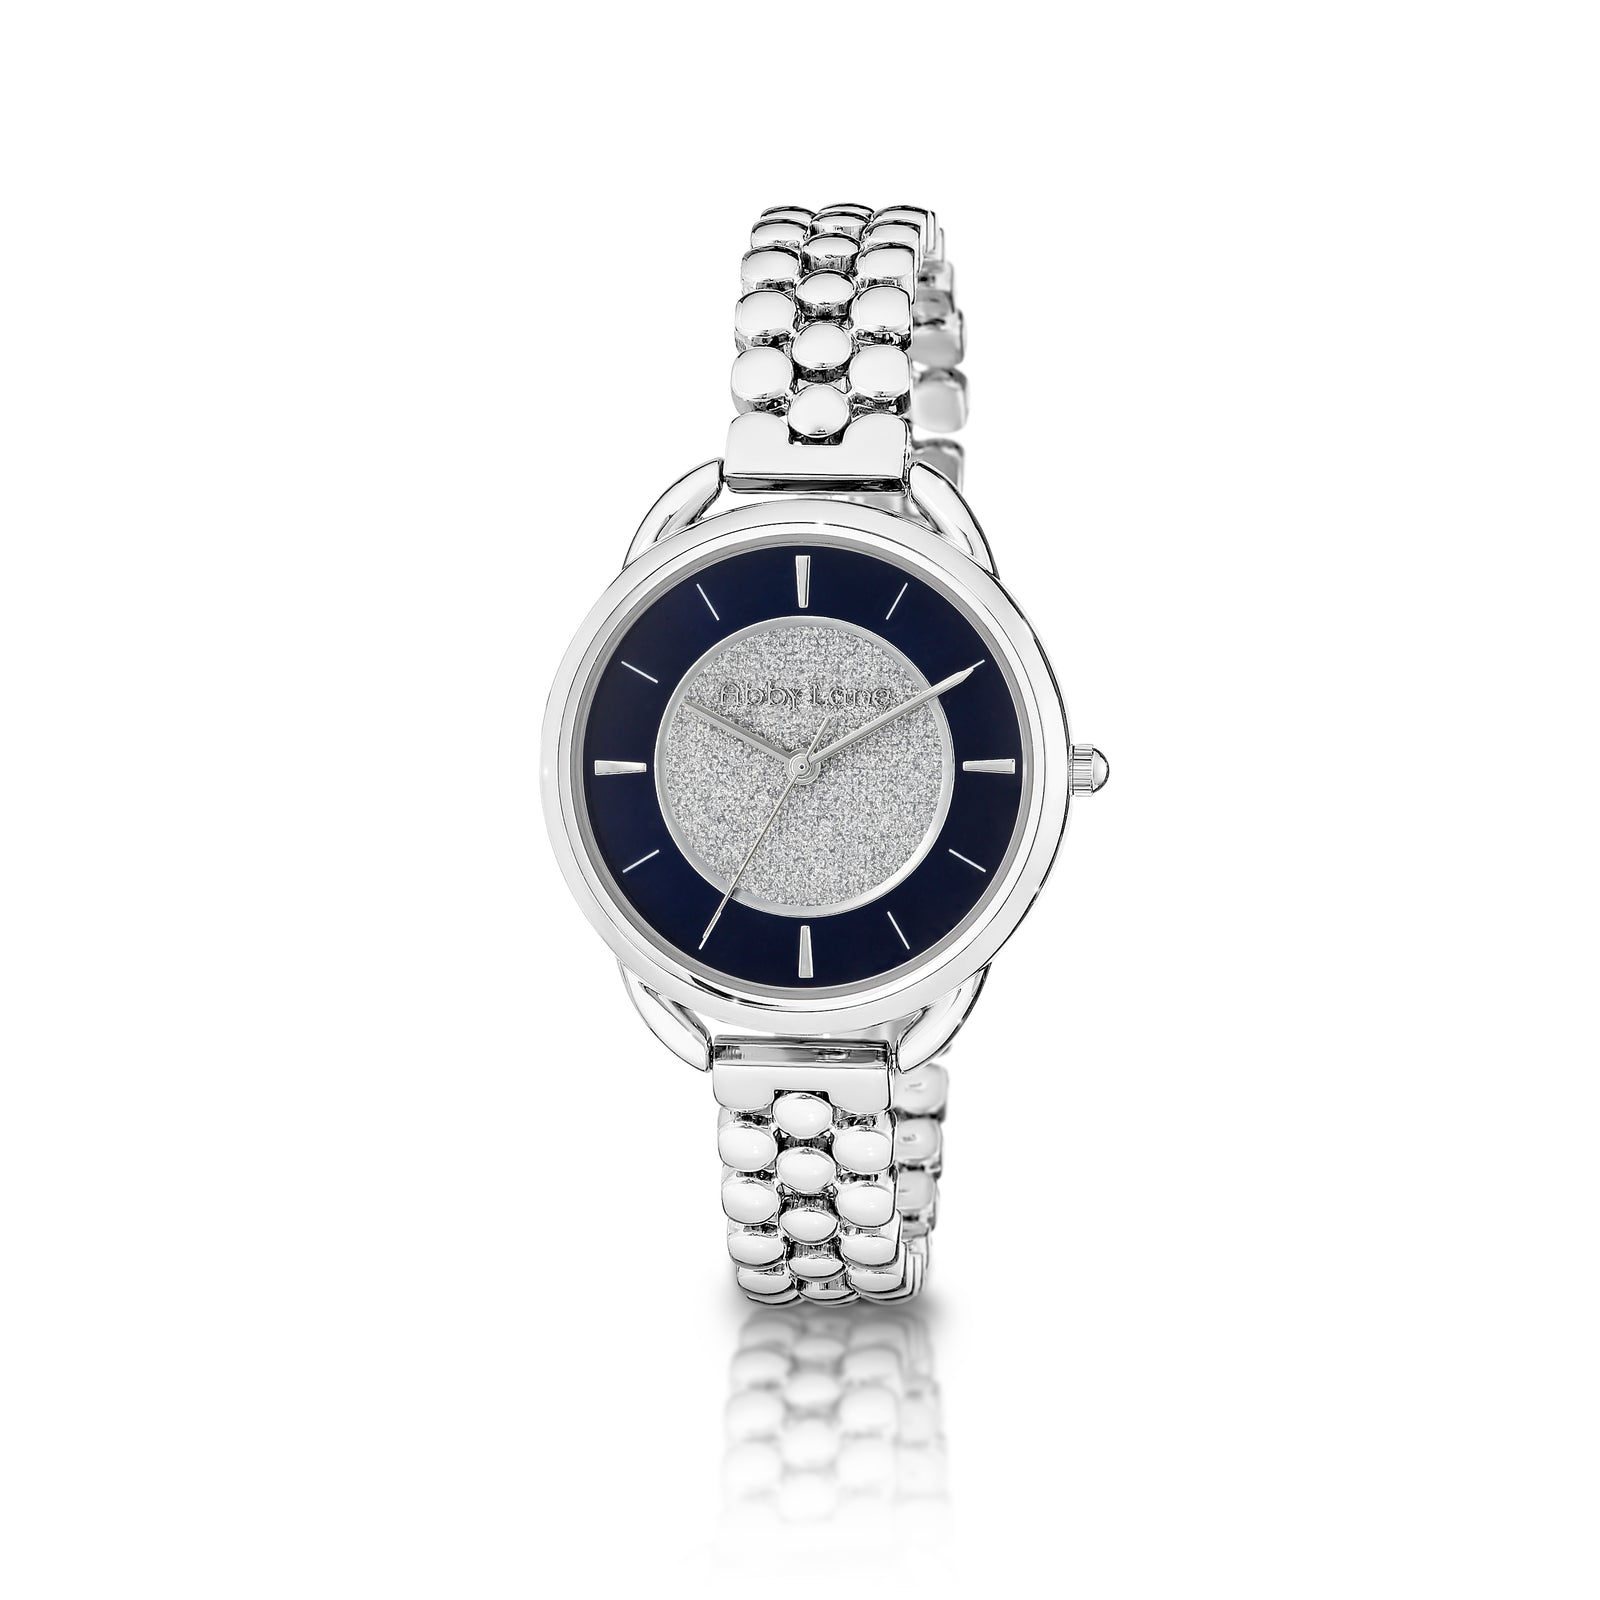 Abby Lane 'Victoria' Collection Ladies Watch.